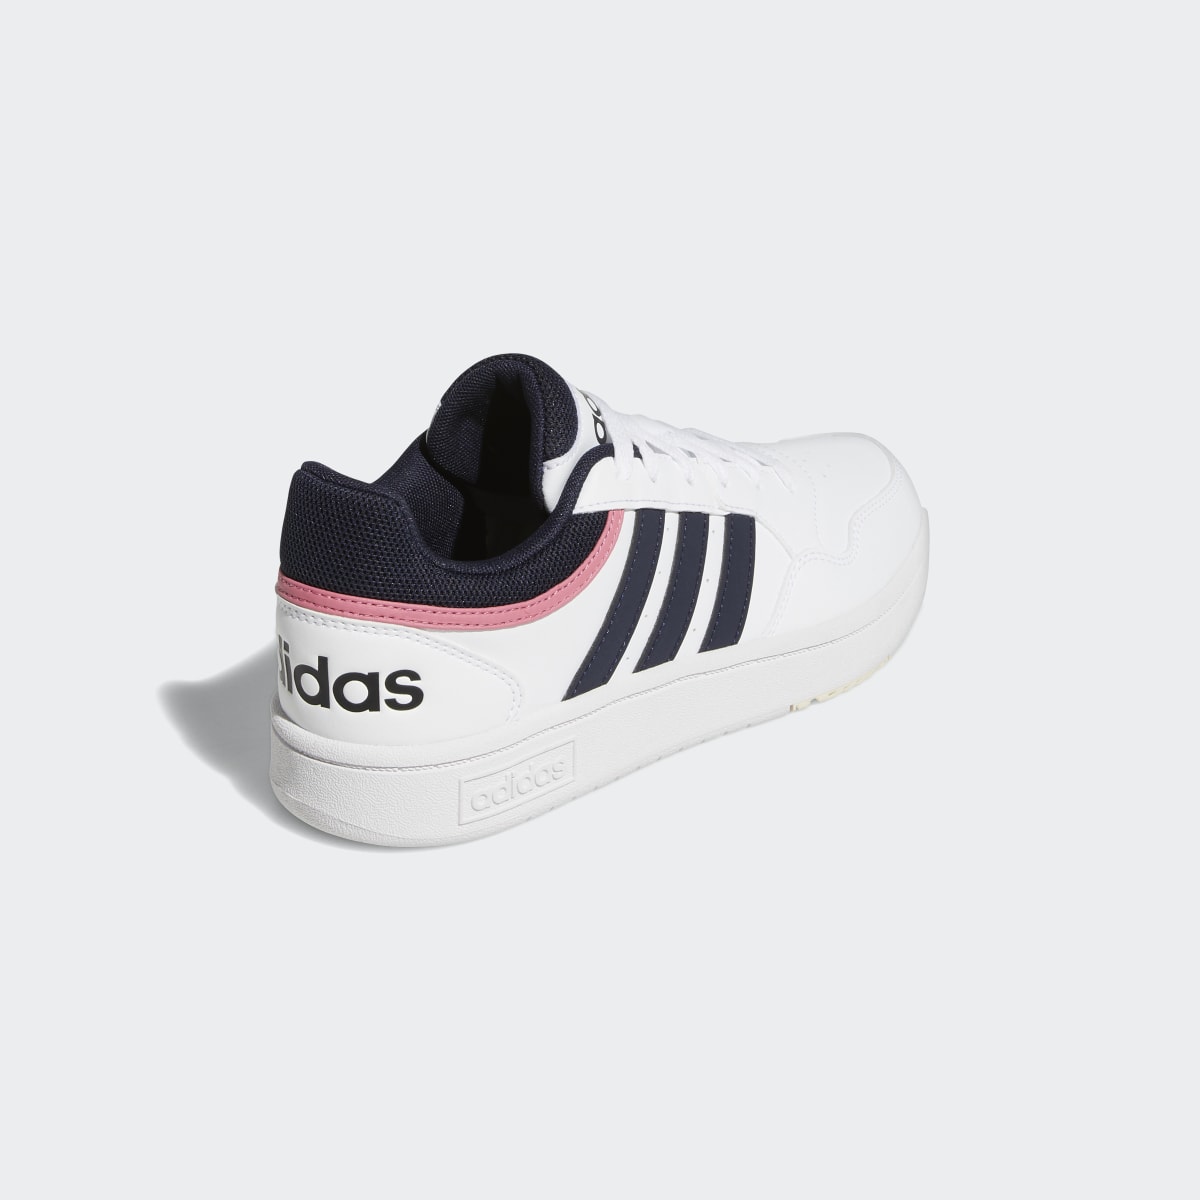 Adidas Hoops 3.0 Low Classic Shoes. 6